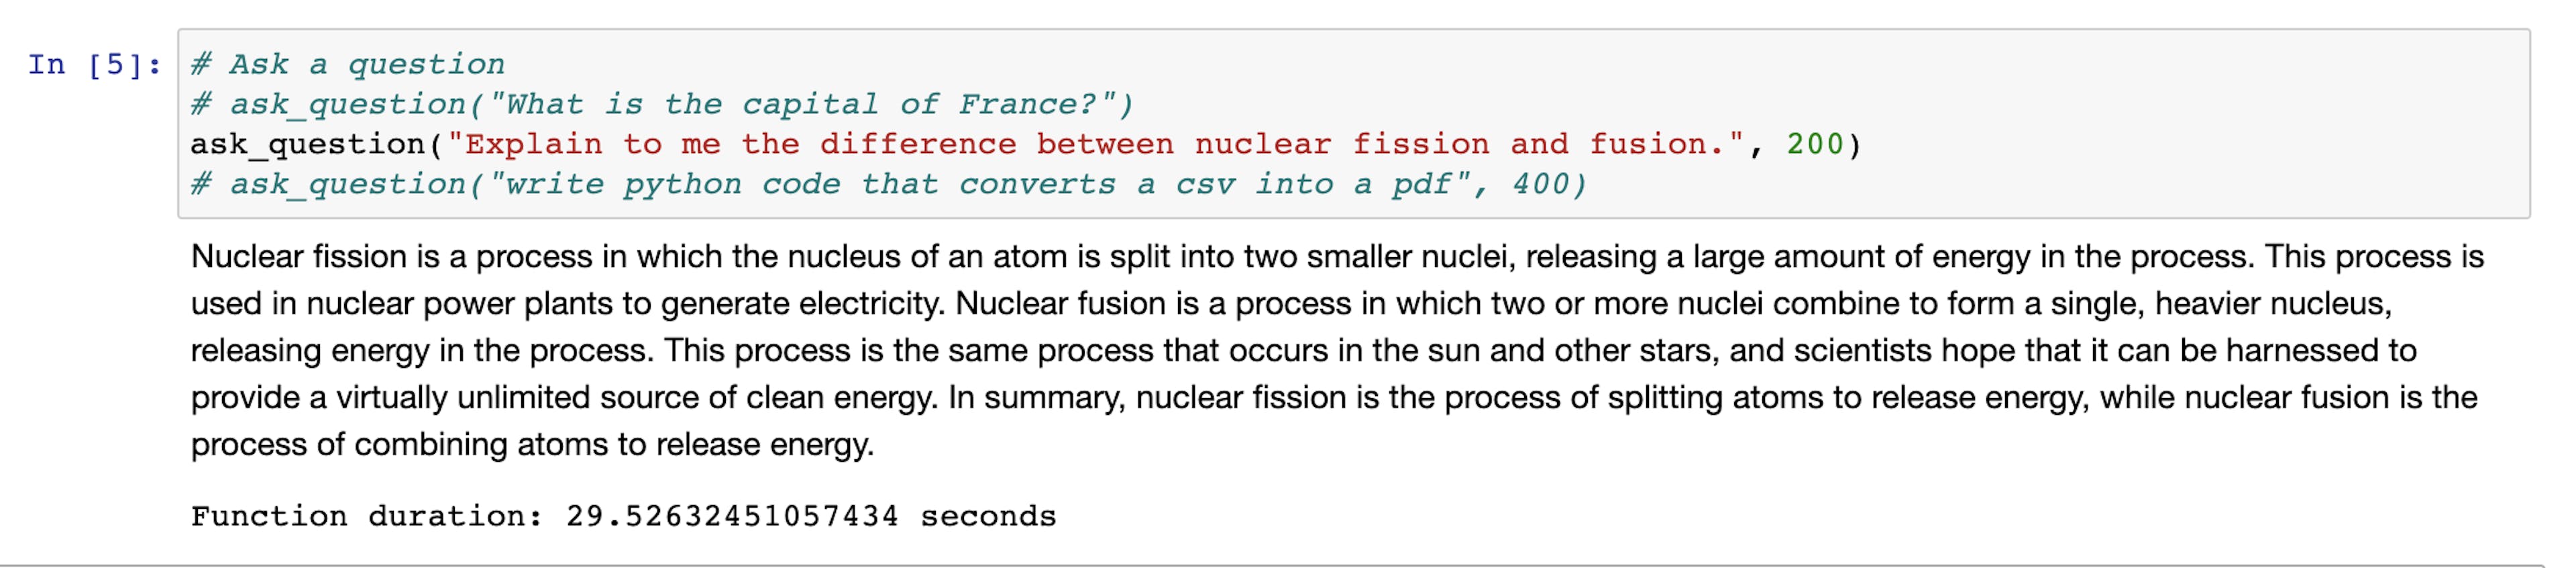 Explain to me the difference between nuclear fission and fusion. Image credit: Author